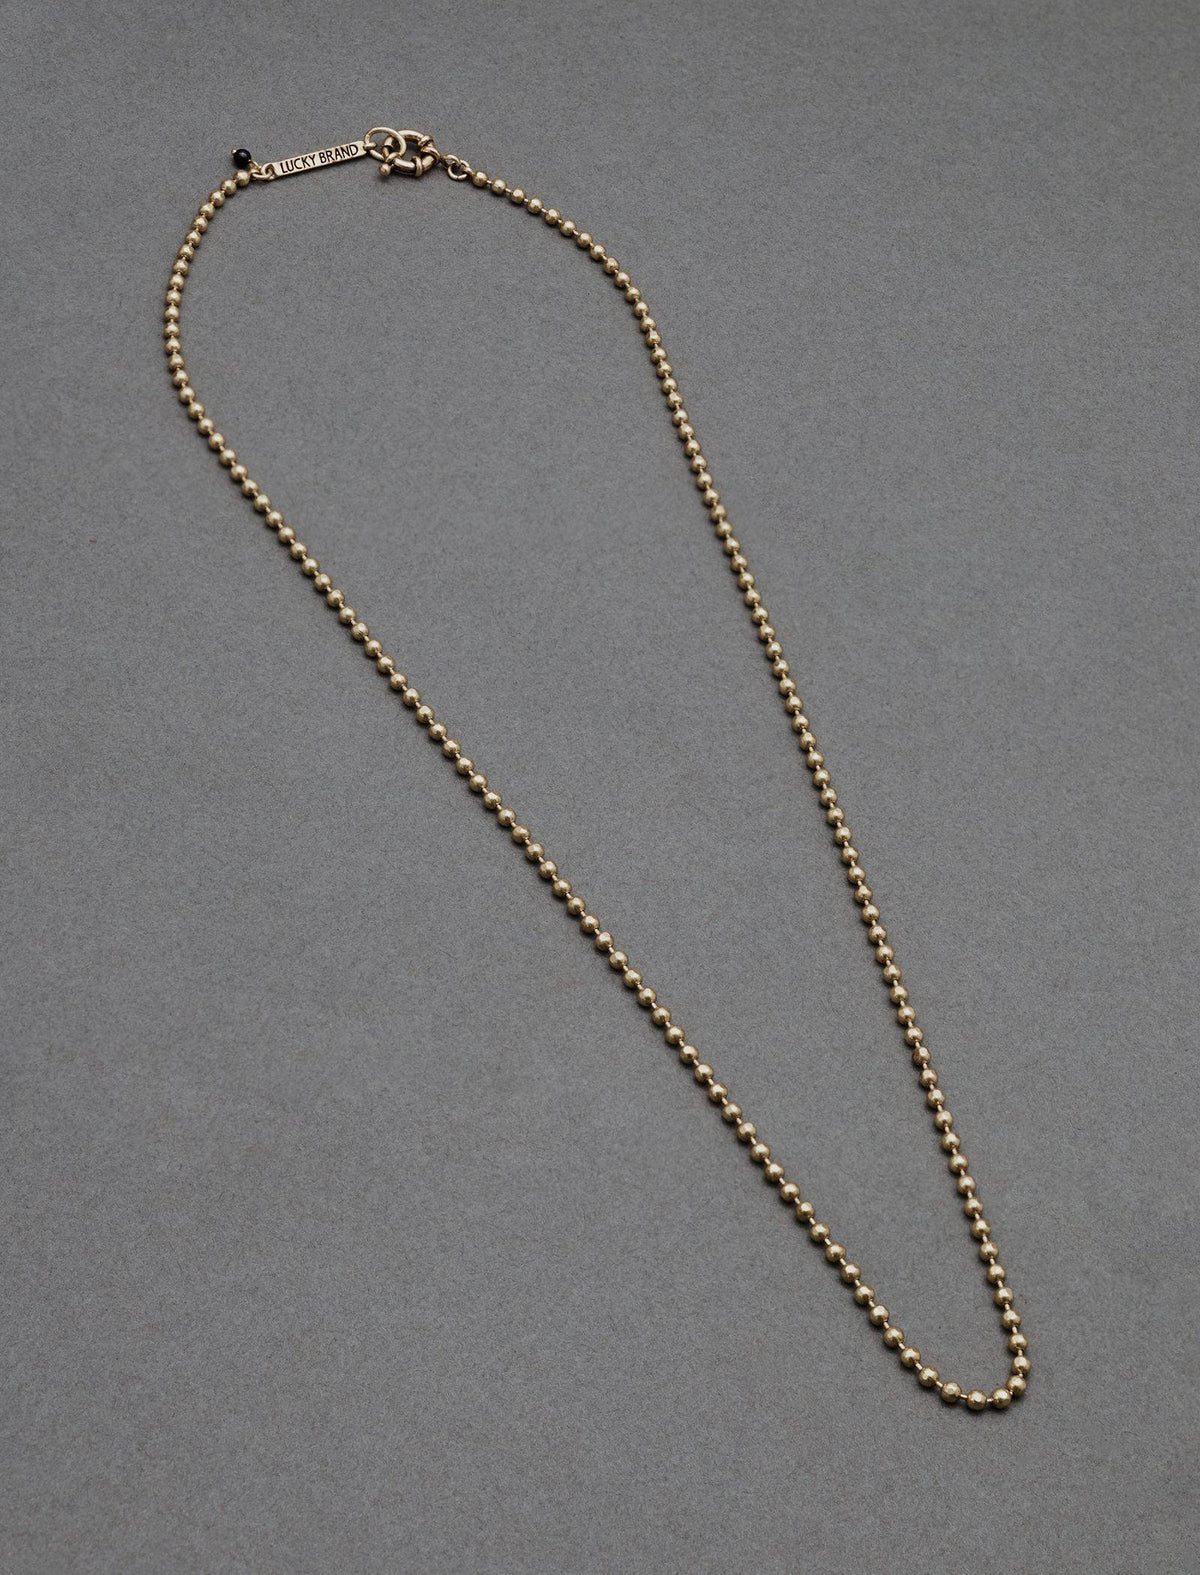 Lucky Brand Mens Chain Necklace - Women's Ladies Accessories Jewelry Necklace Pendants Gold